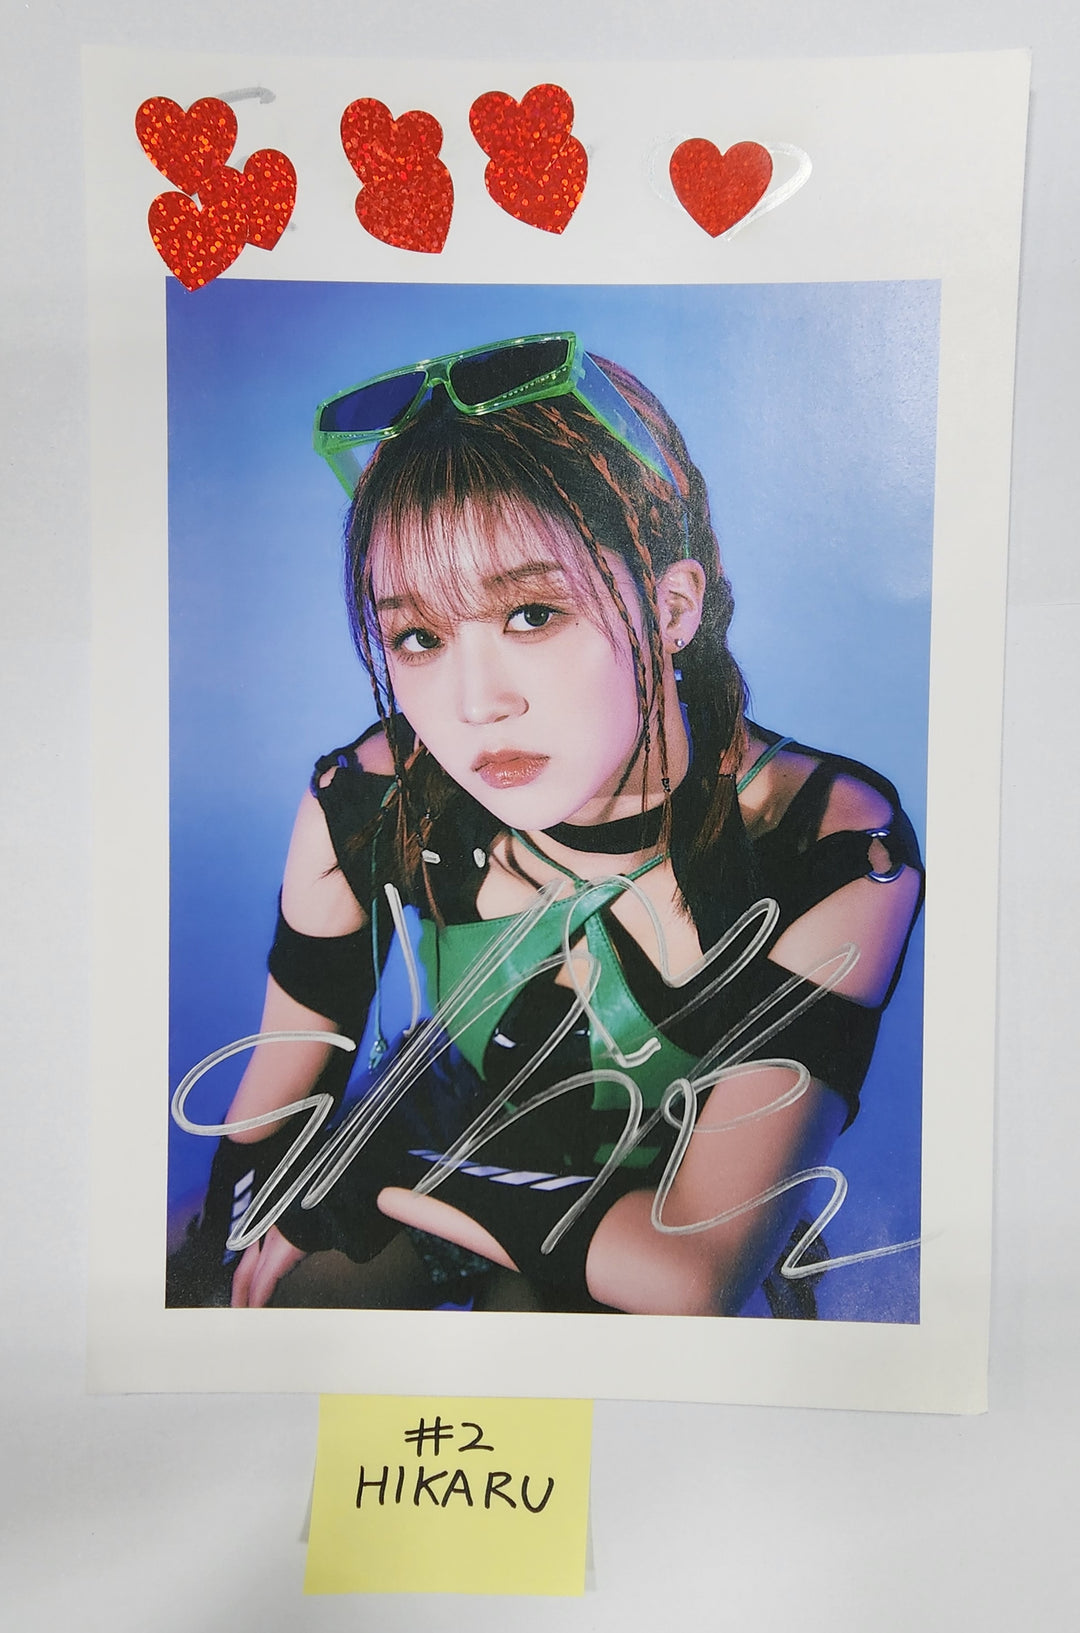 Kep1er “TroubleShooter” 3rd - A Cut Page From Fansign Event Album